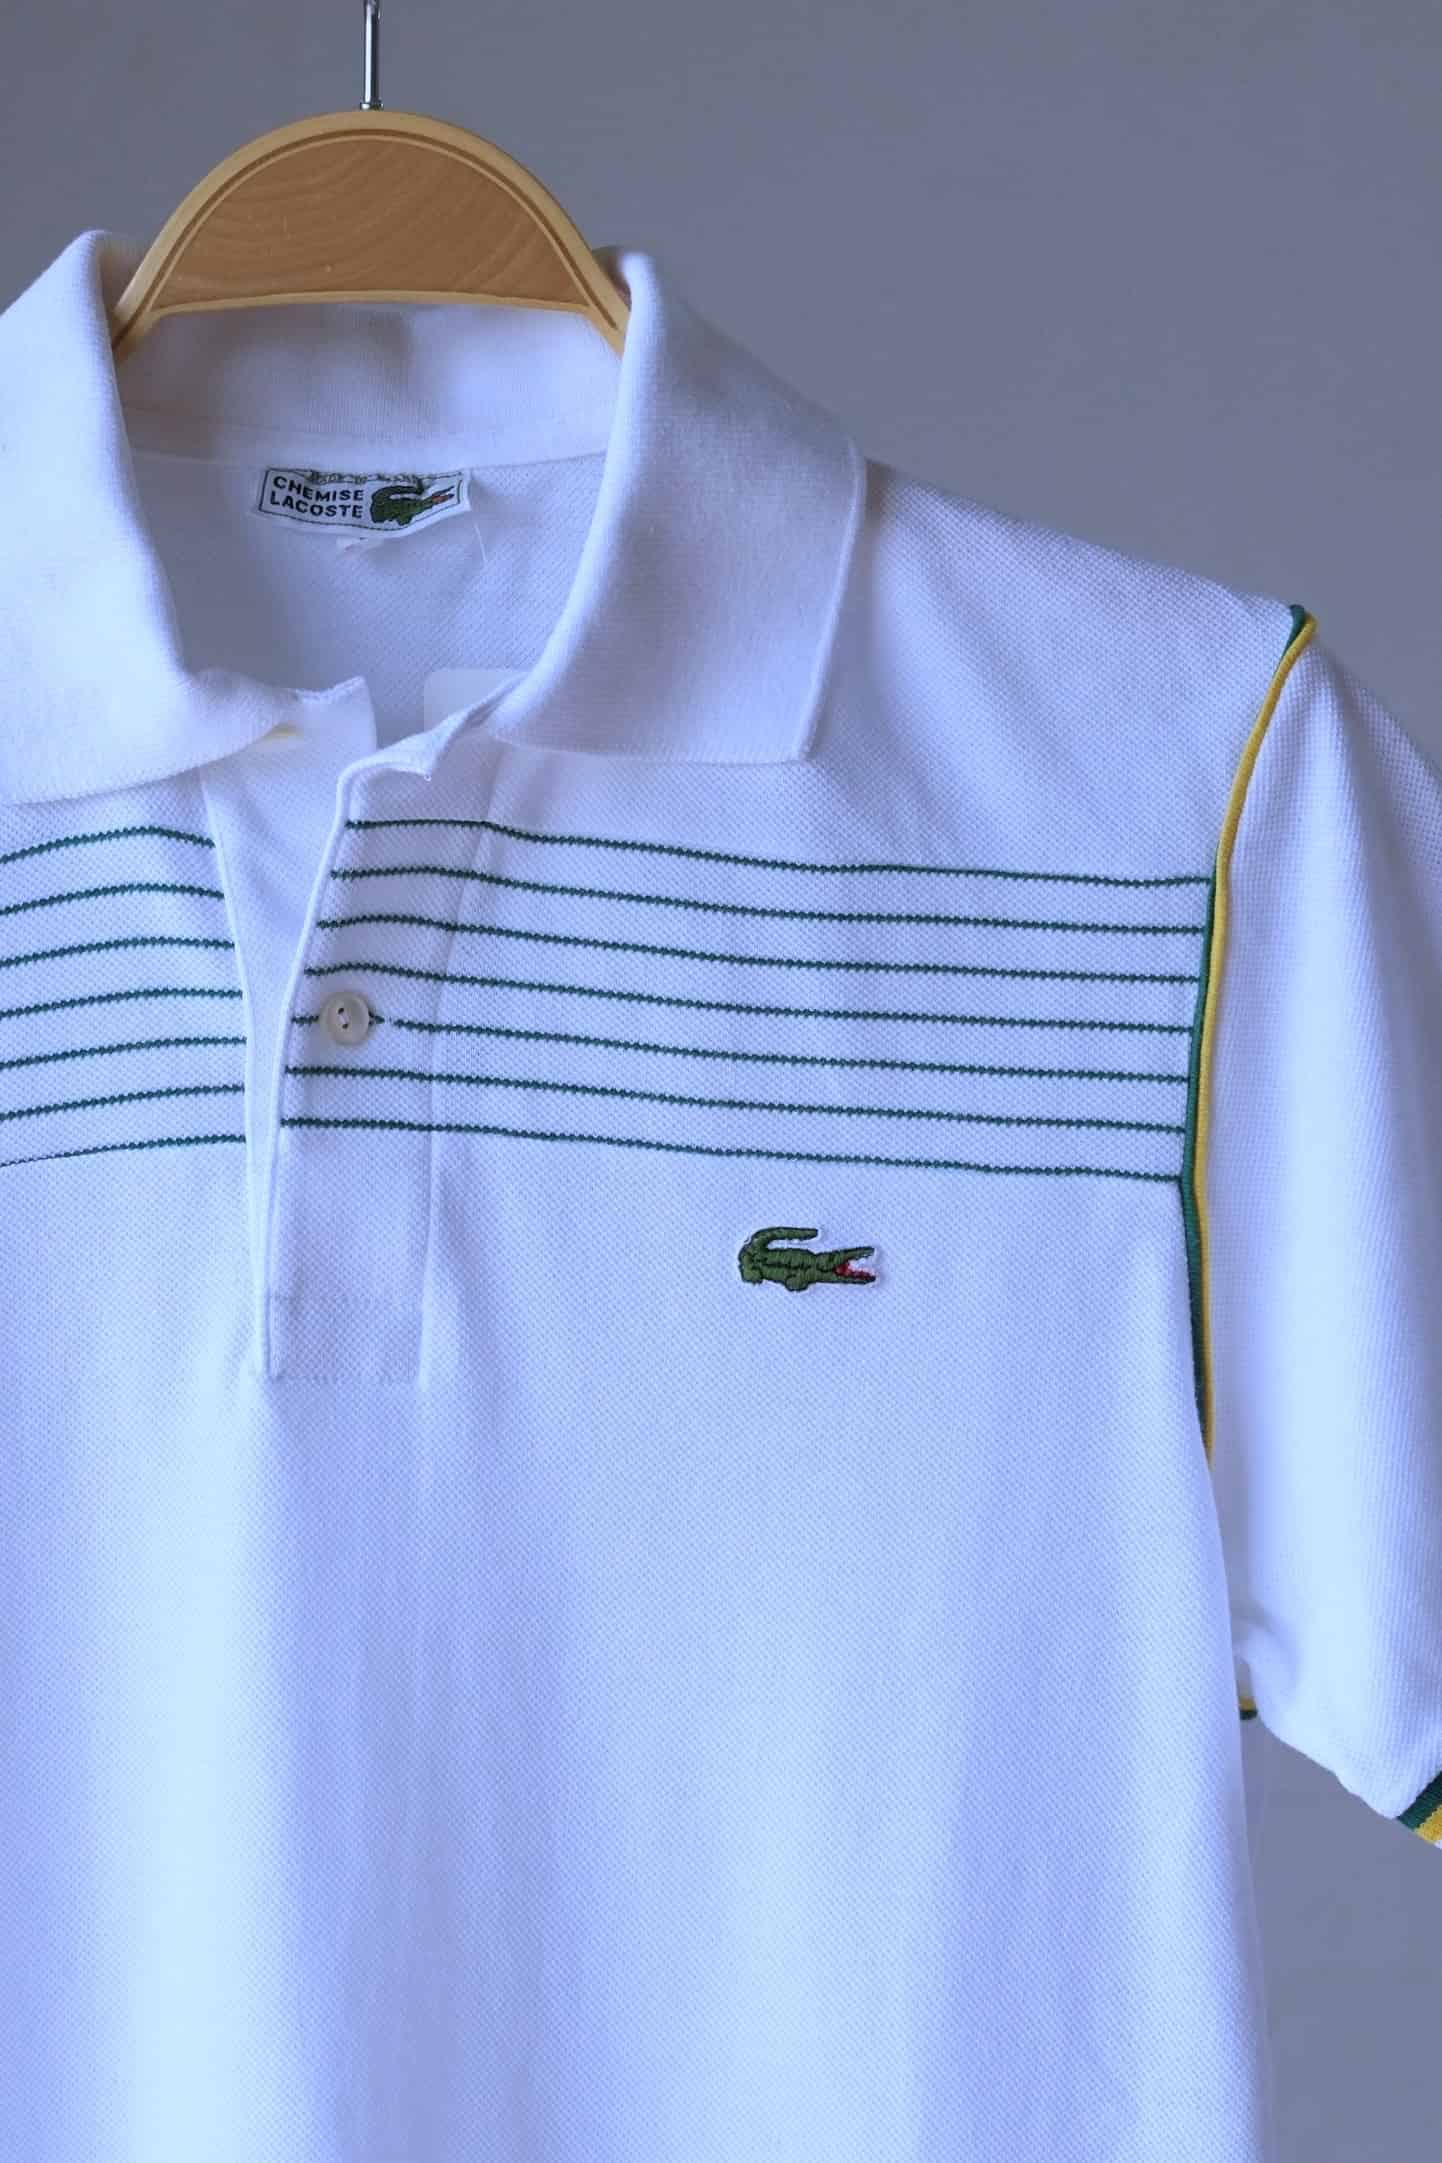 close up of LACOSTE Retro Polo in white with yellow stripes and green edging photographed on hanger